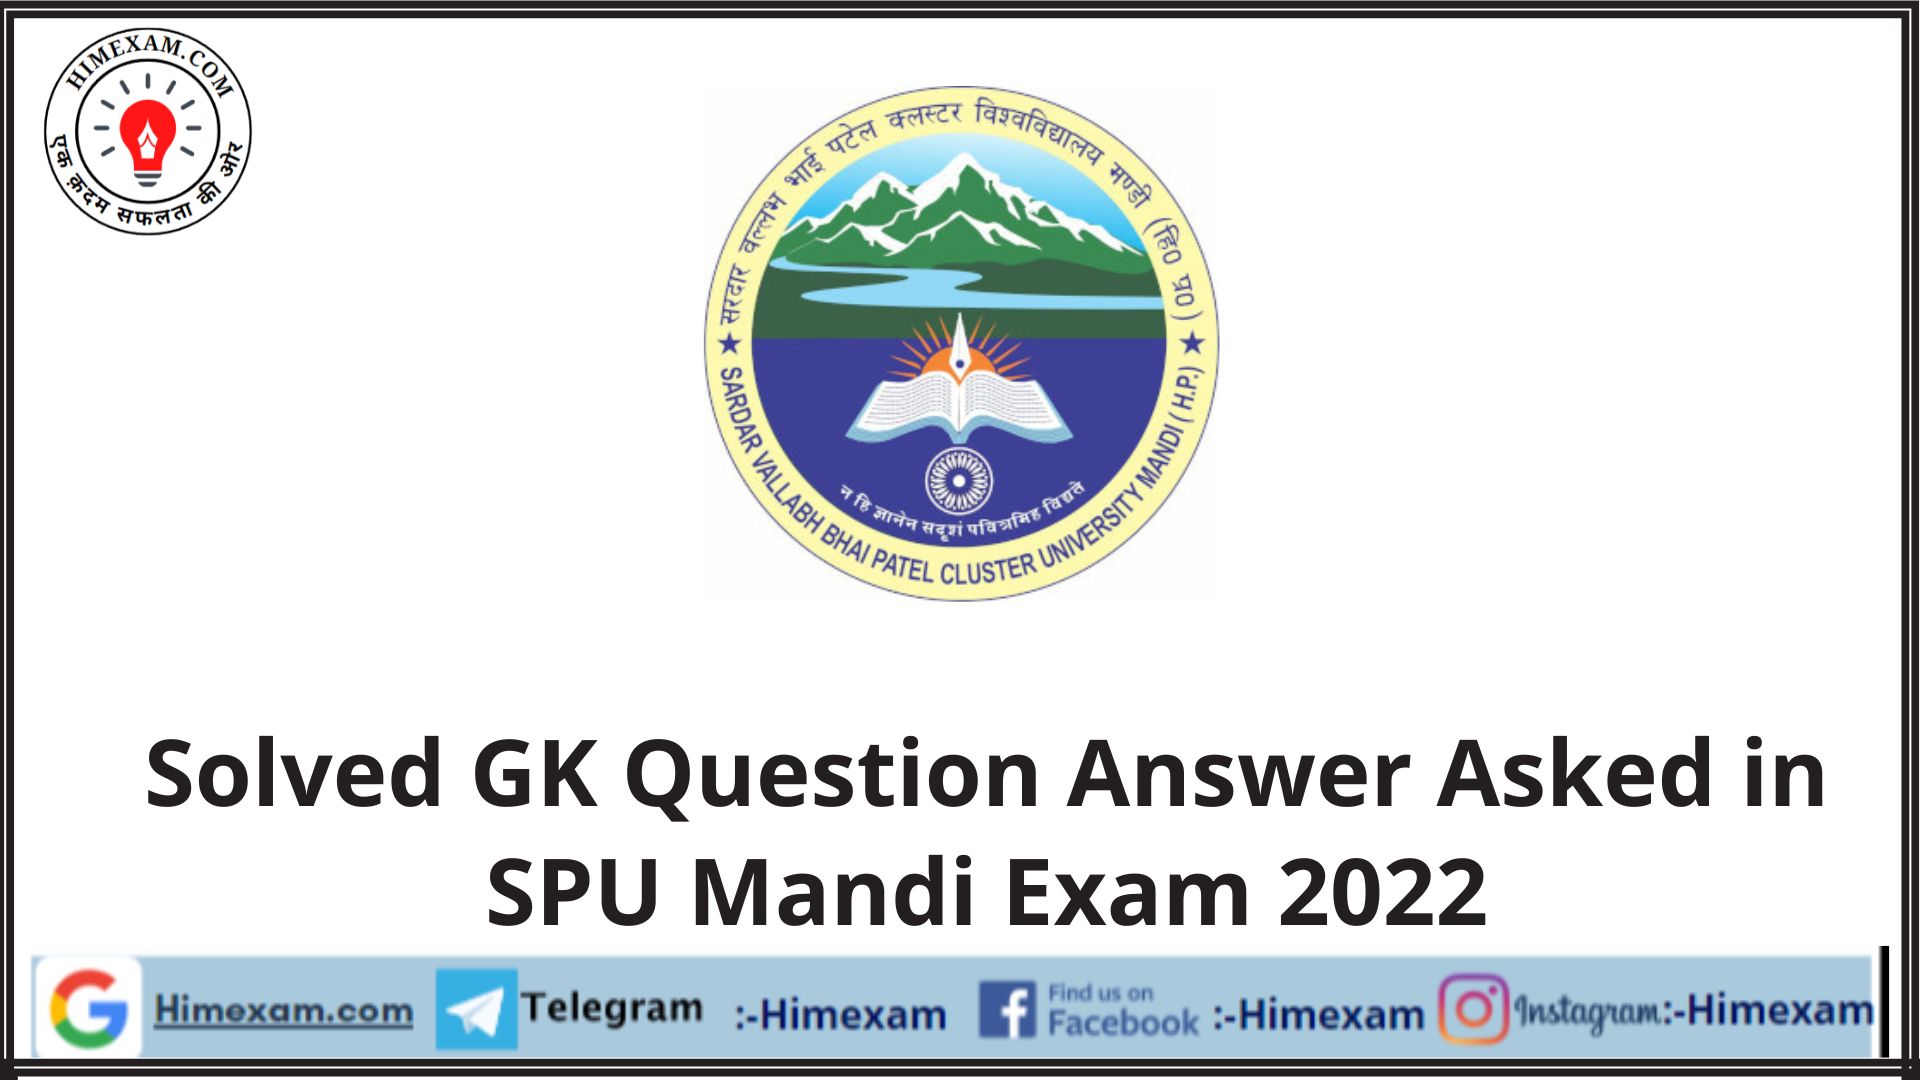 Solved GK Question Answer Asked in SPU Mandi Exam 2022